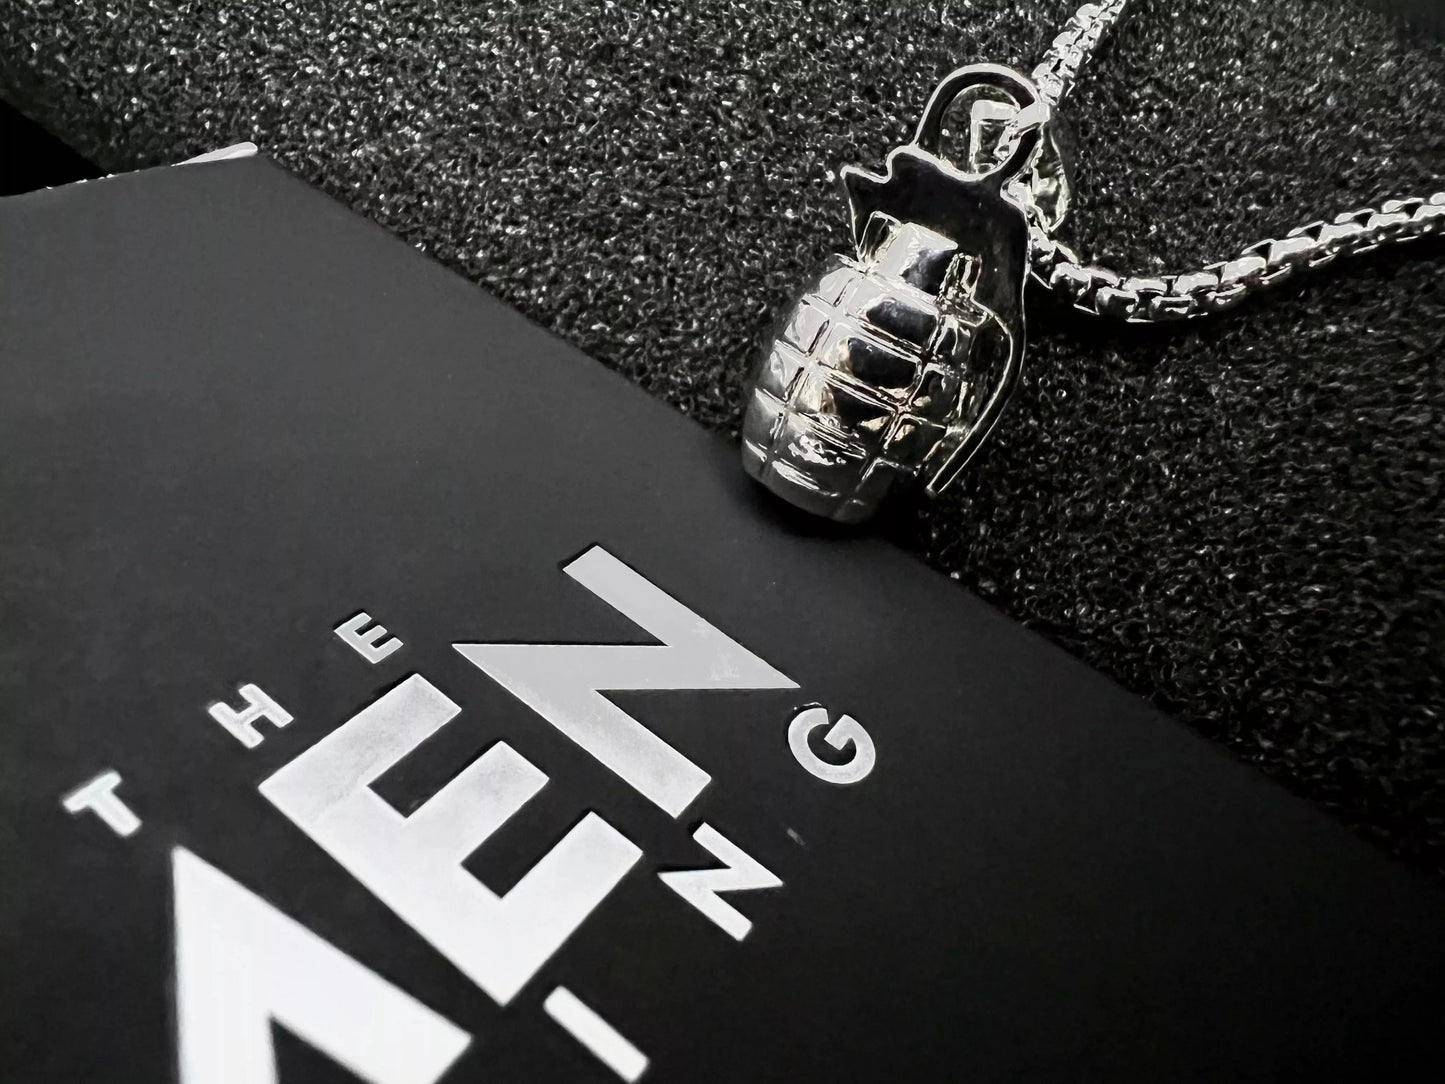 THE MEN THING Alloy Grenade Pendant with Pure Stainless Steel 24inch Chain for Men, American trending Style - Round Box Chain & Pendant for Men & Boy